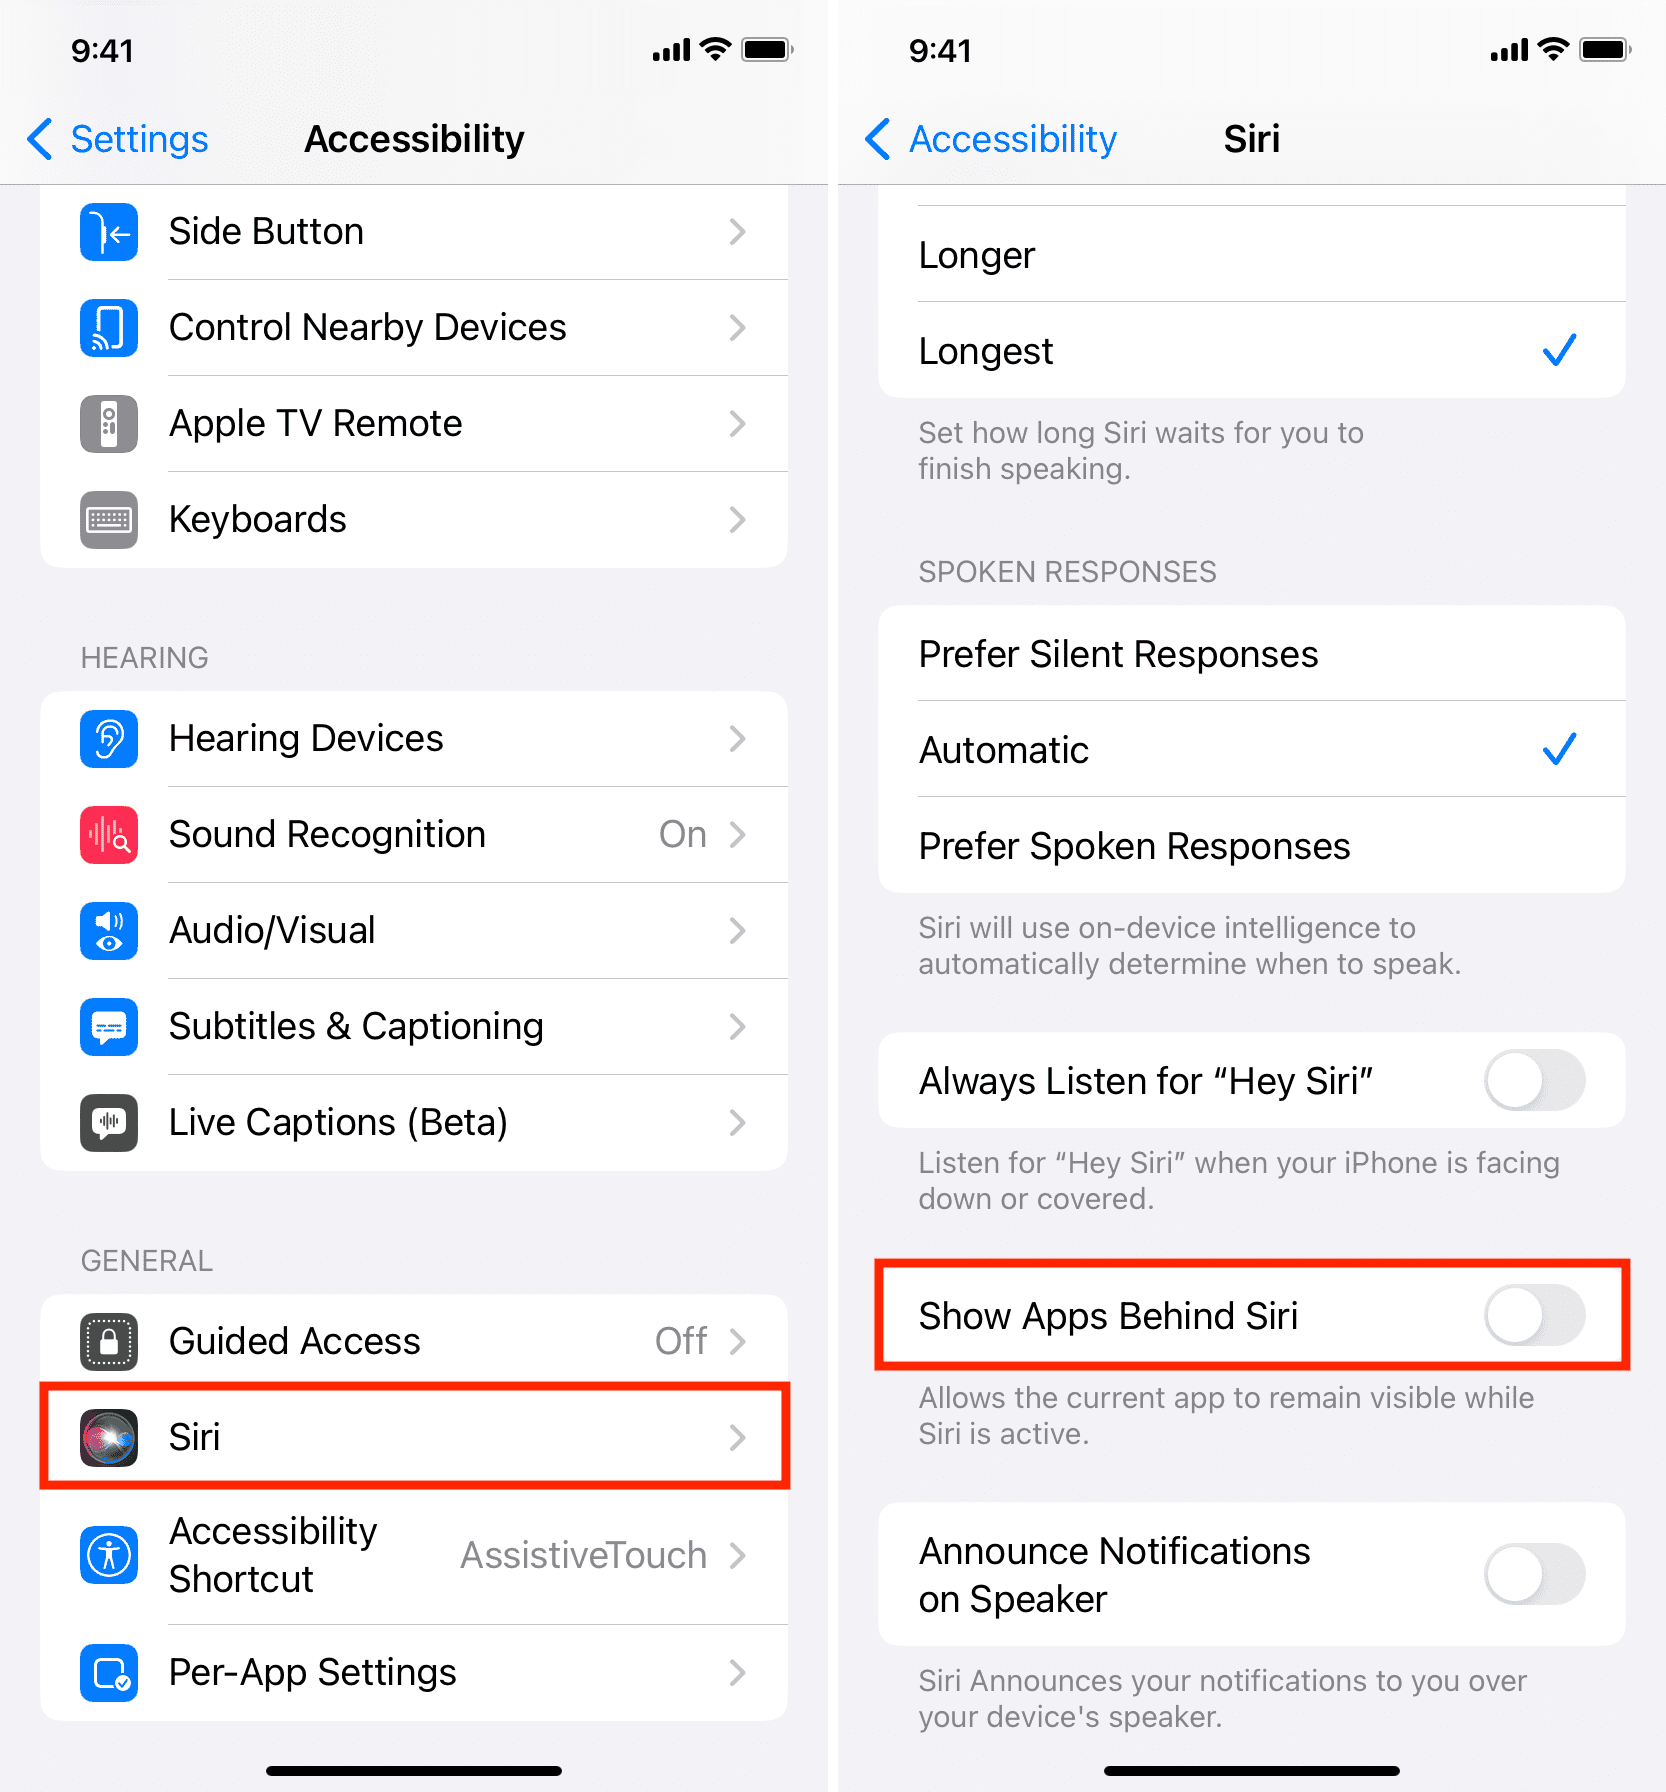 Disable Show Apps Behind Siri in iPhone Settings